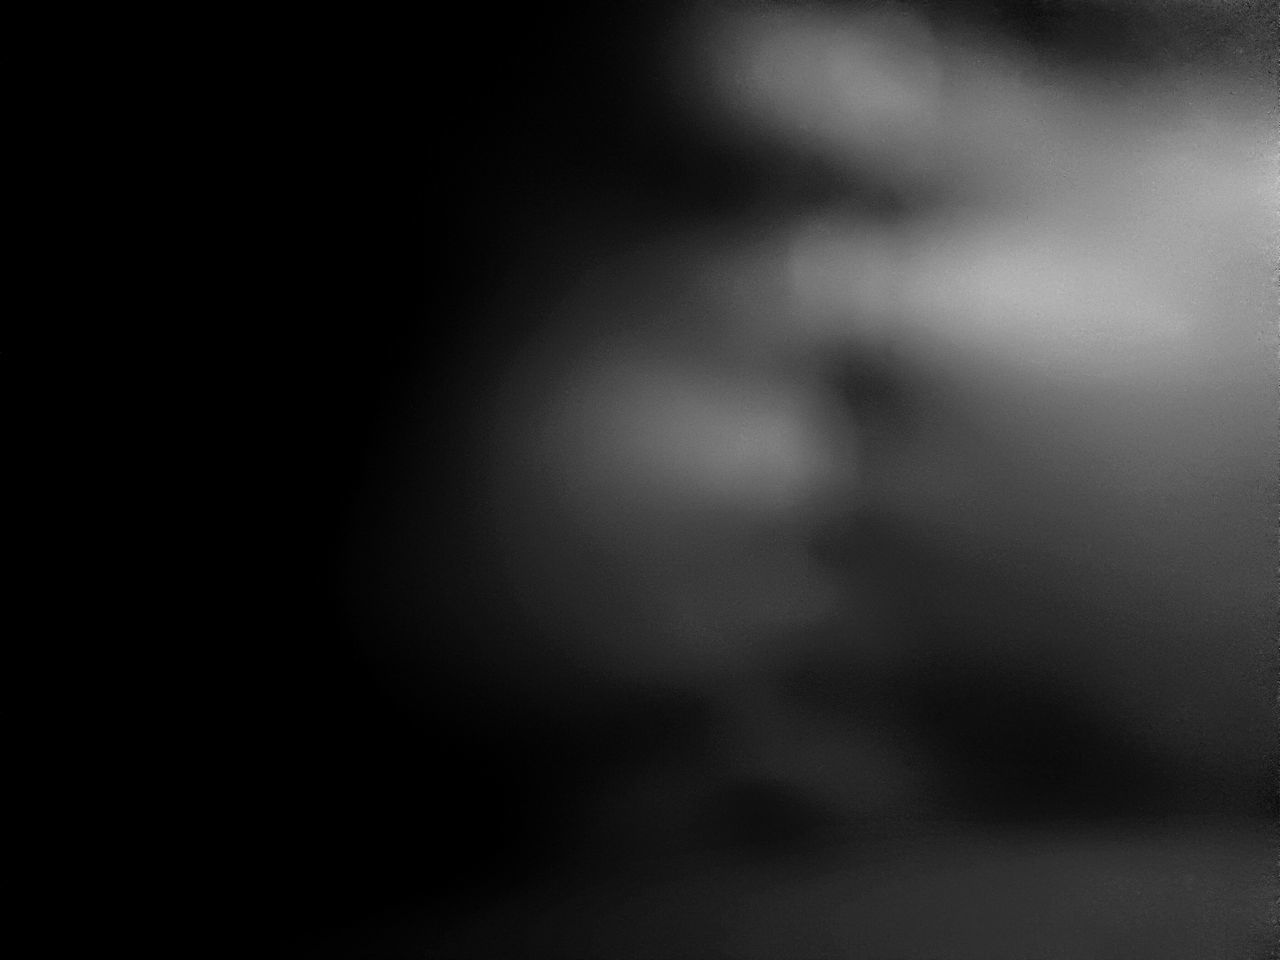 darkness, black and white, black, light, monochrome, monochrome photography, dark, spooky, fear, horror, indoors, backgrounds, one person, close-up, copy space, abstract, defocused, white, mystery